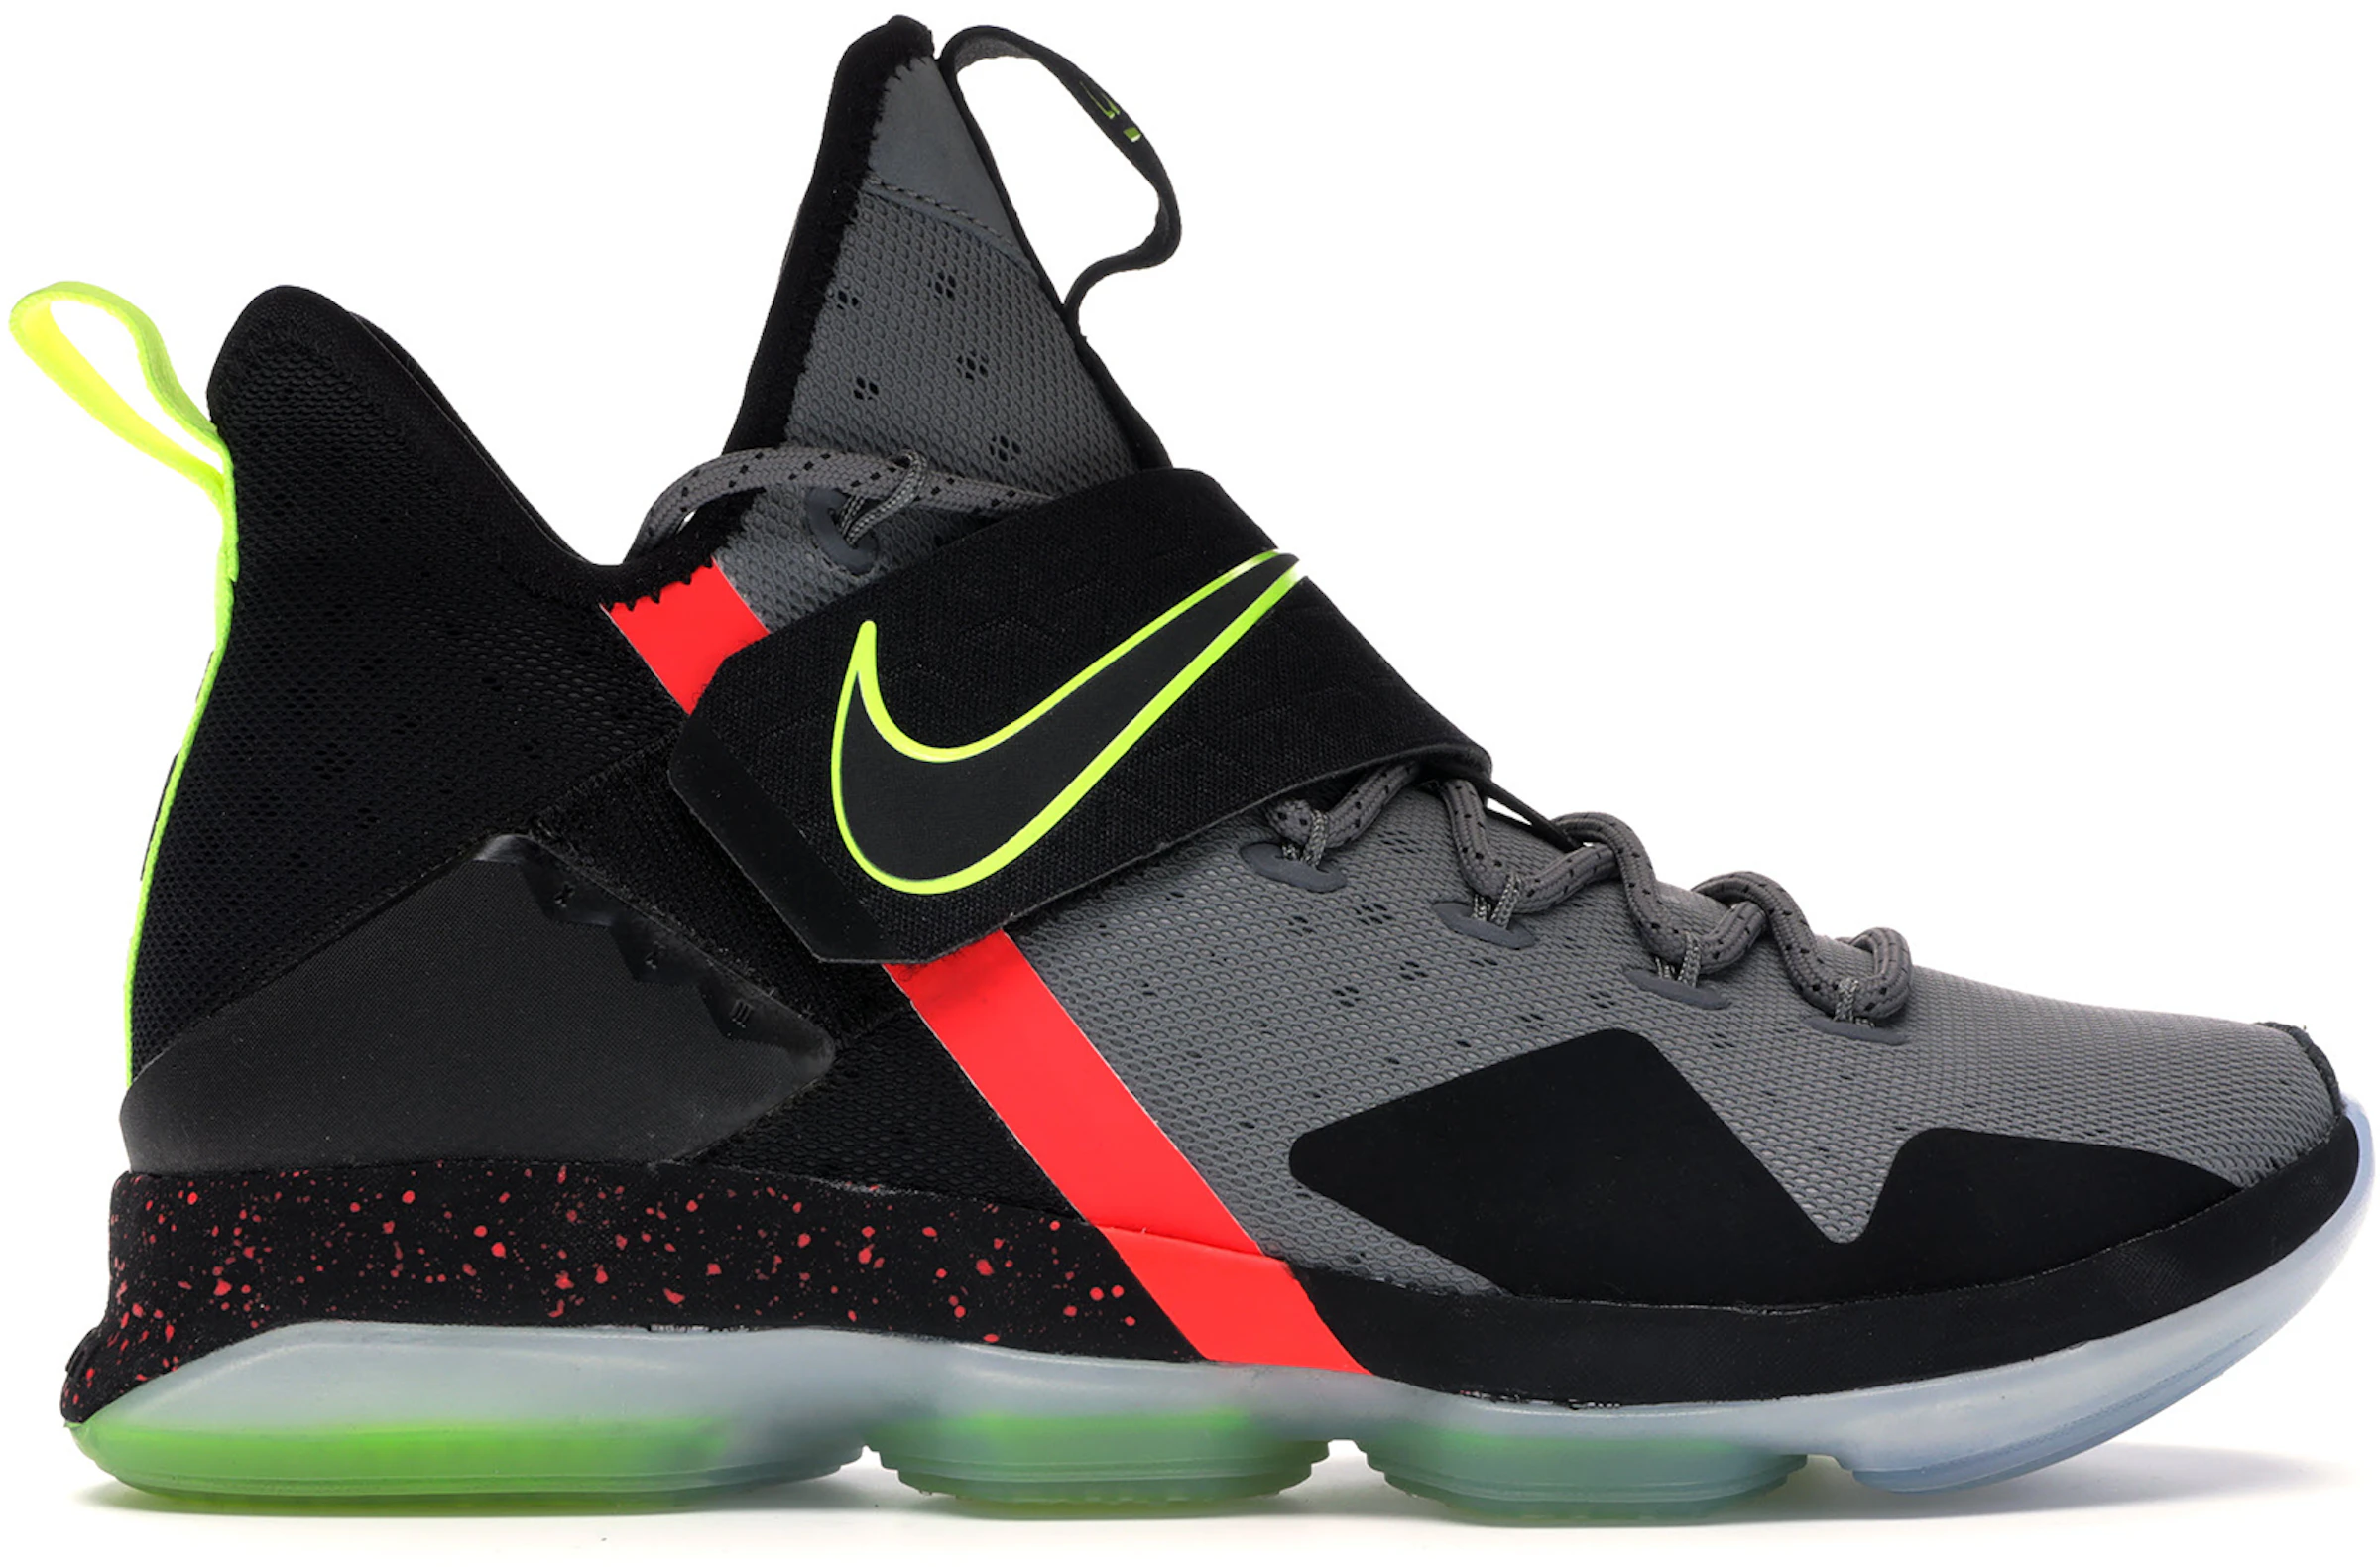 Buy Nike LeBron 14 Shoes & New Sneakers - StockX